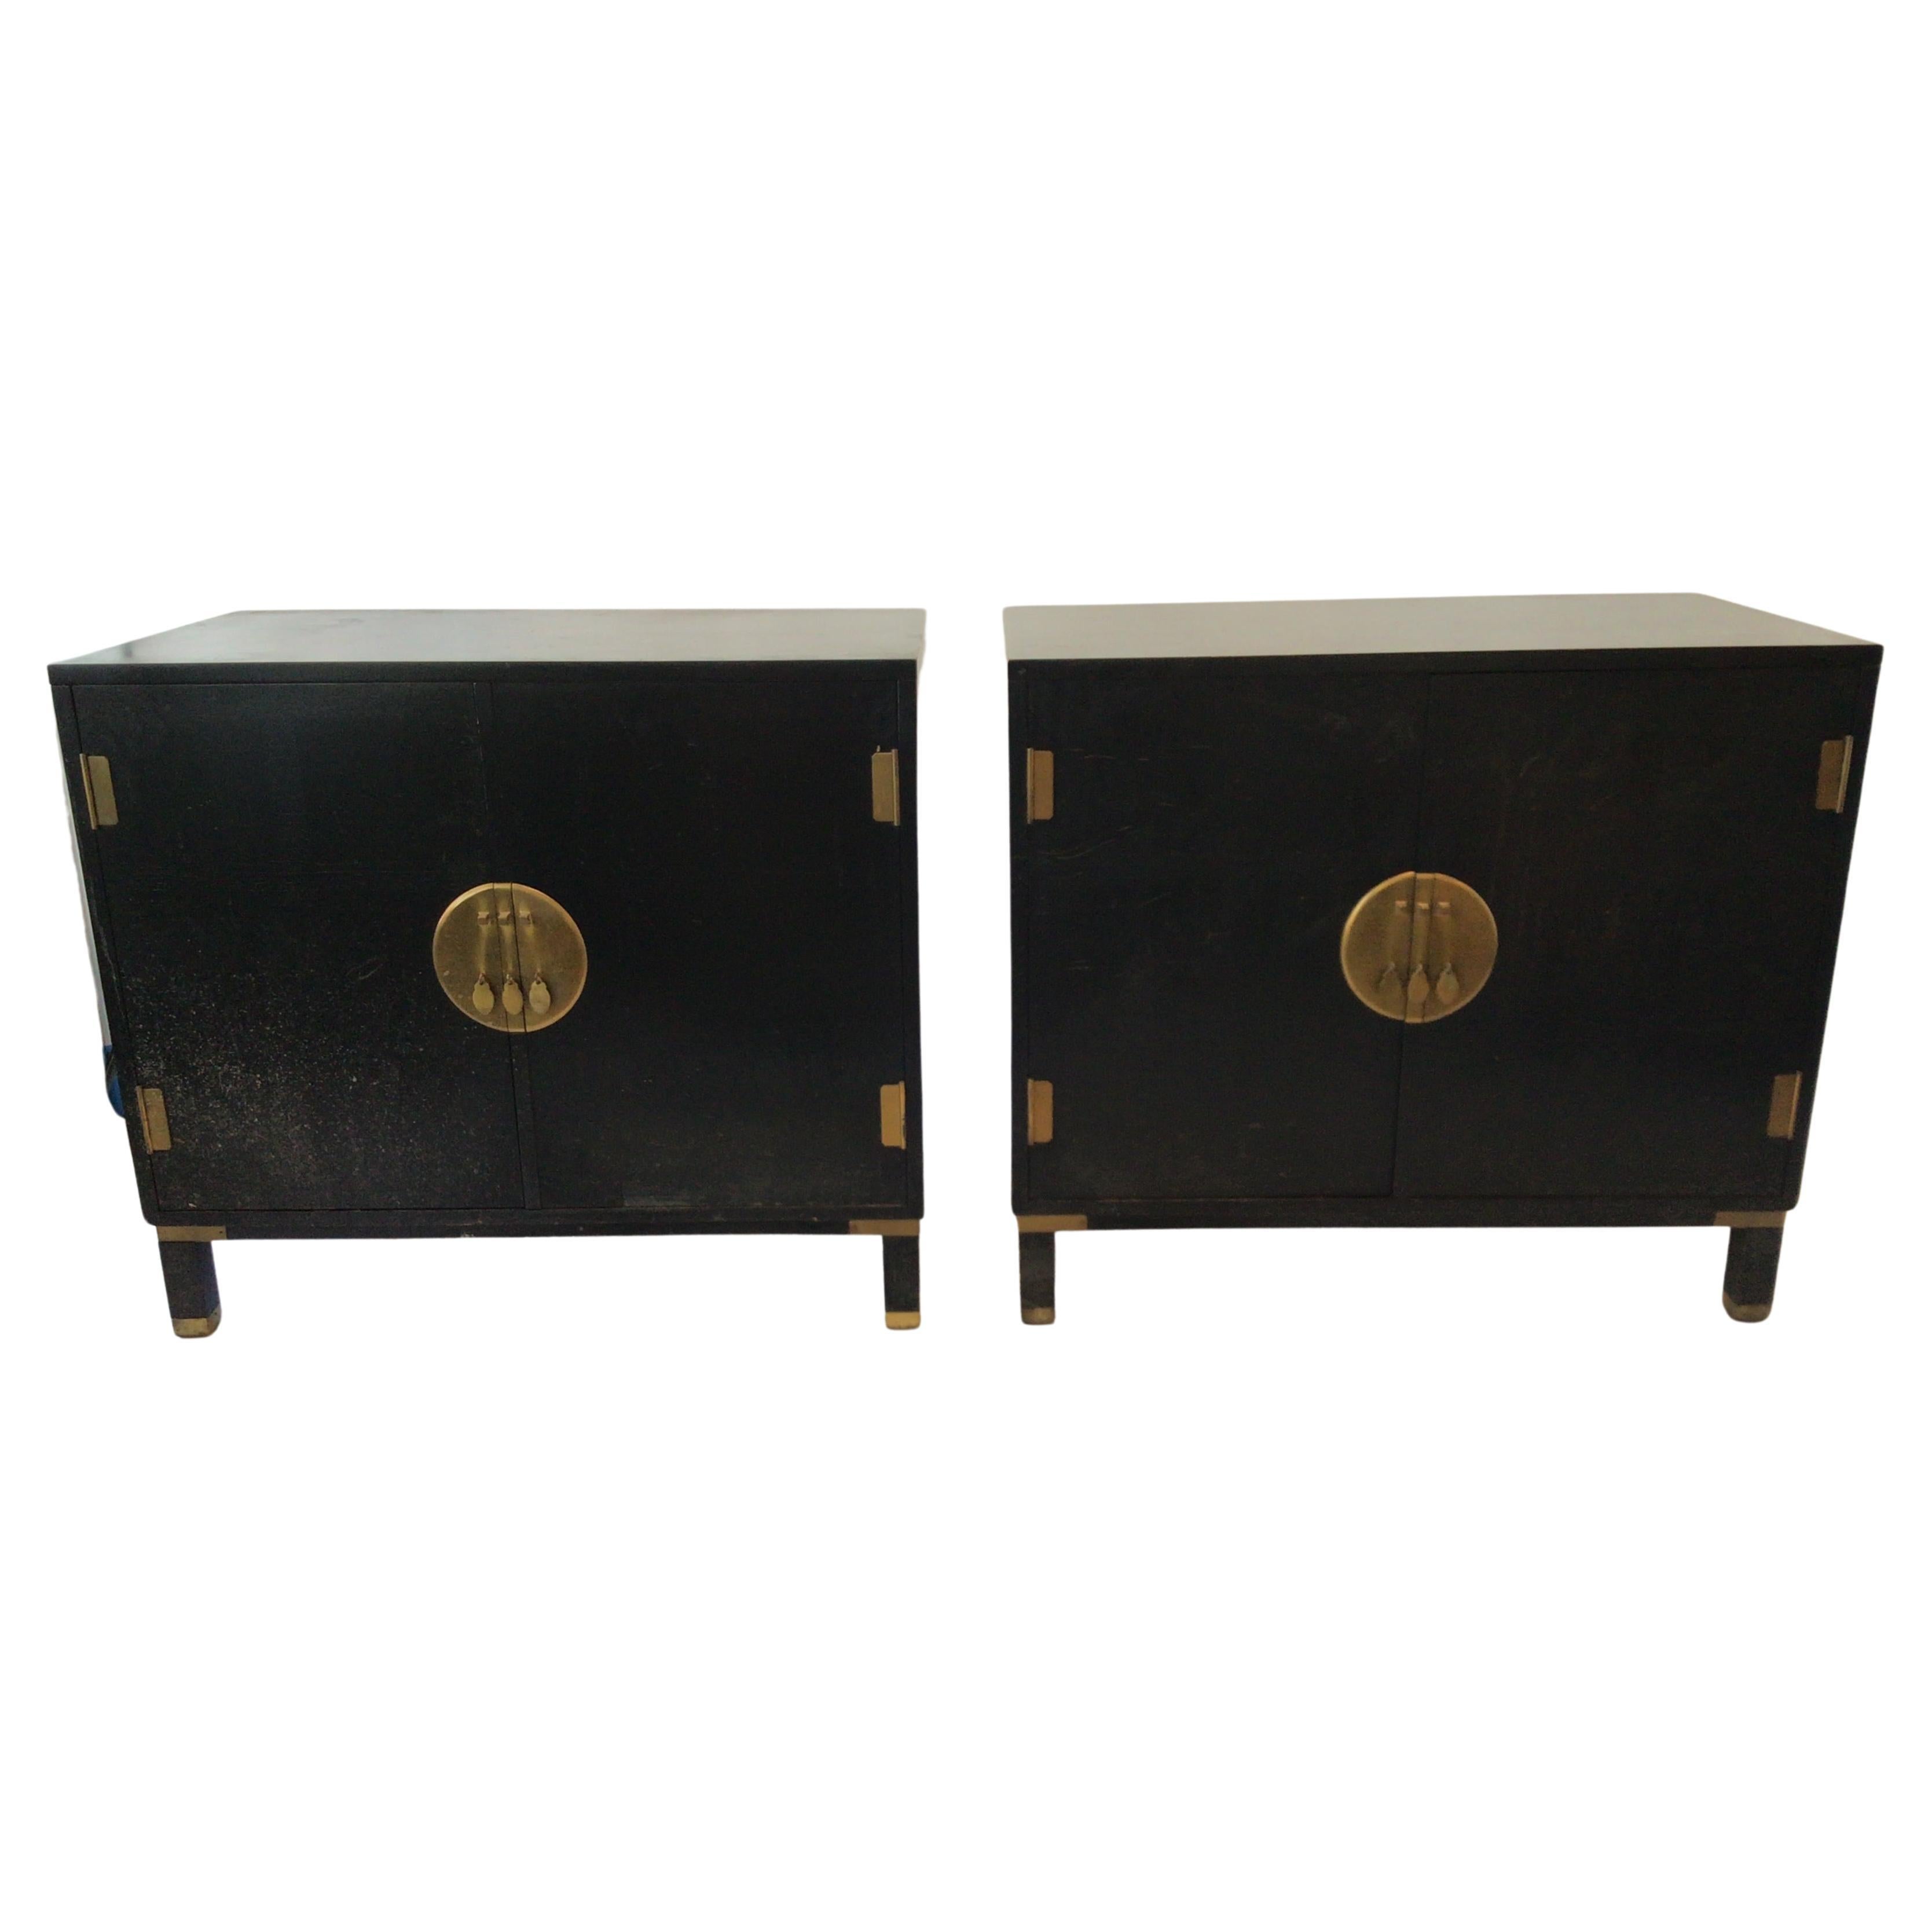 Pair of 1960s Baker Asian Chests with Brass Hardware